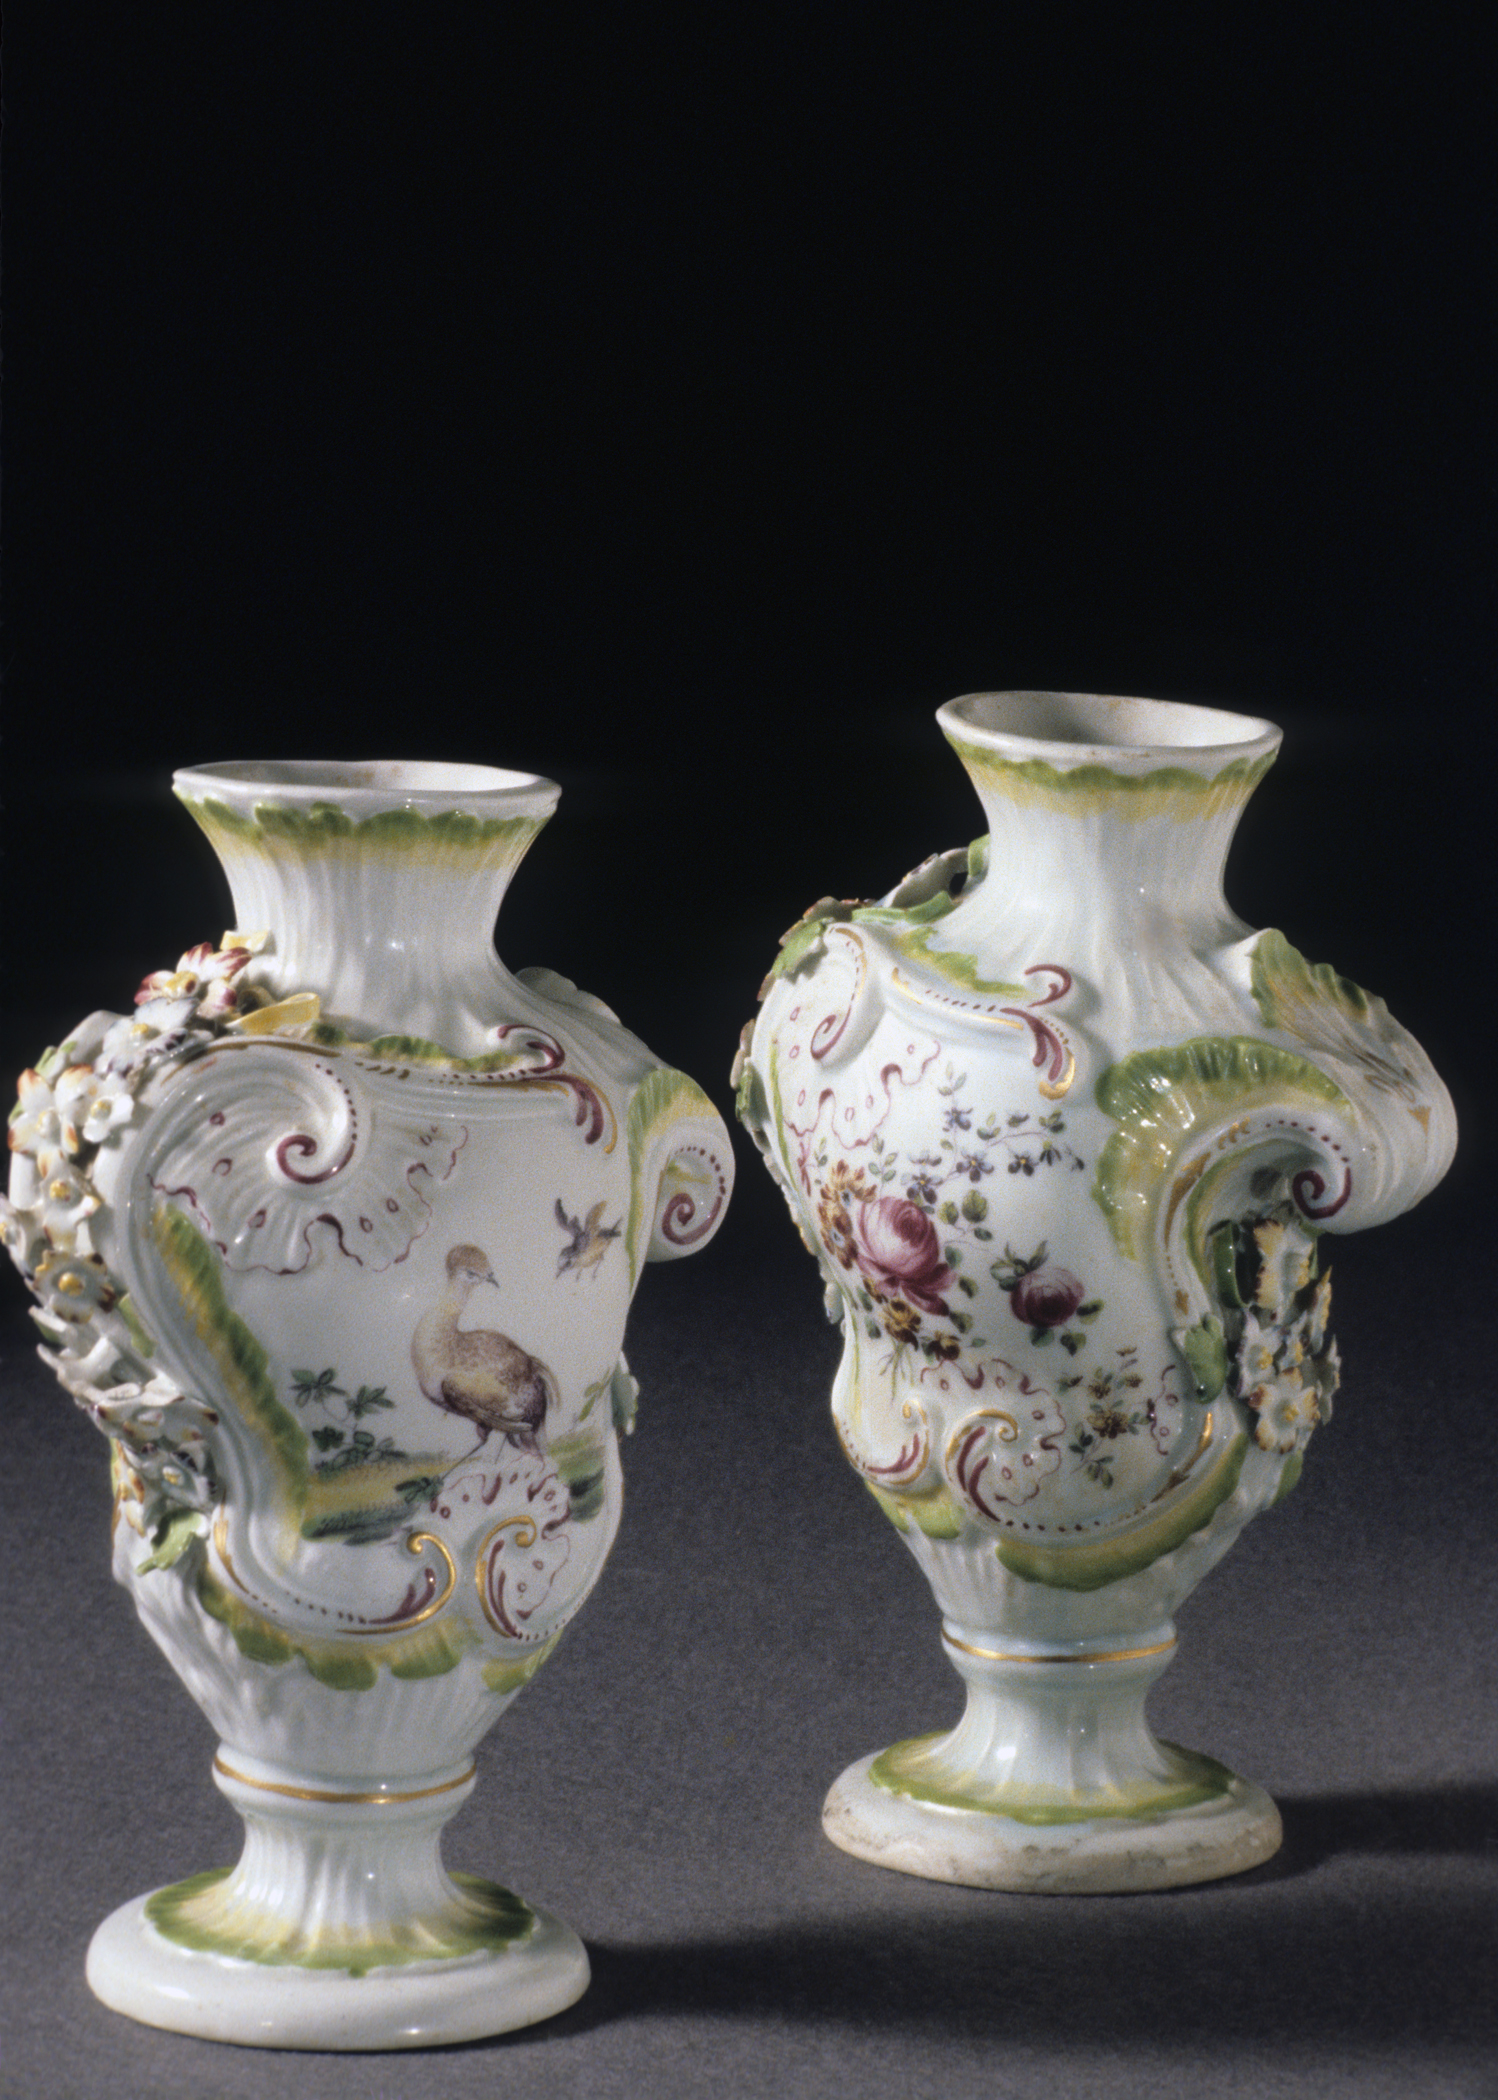 1961.0928.001, .002 Derby porcelain flower containers (vases)